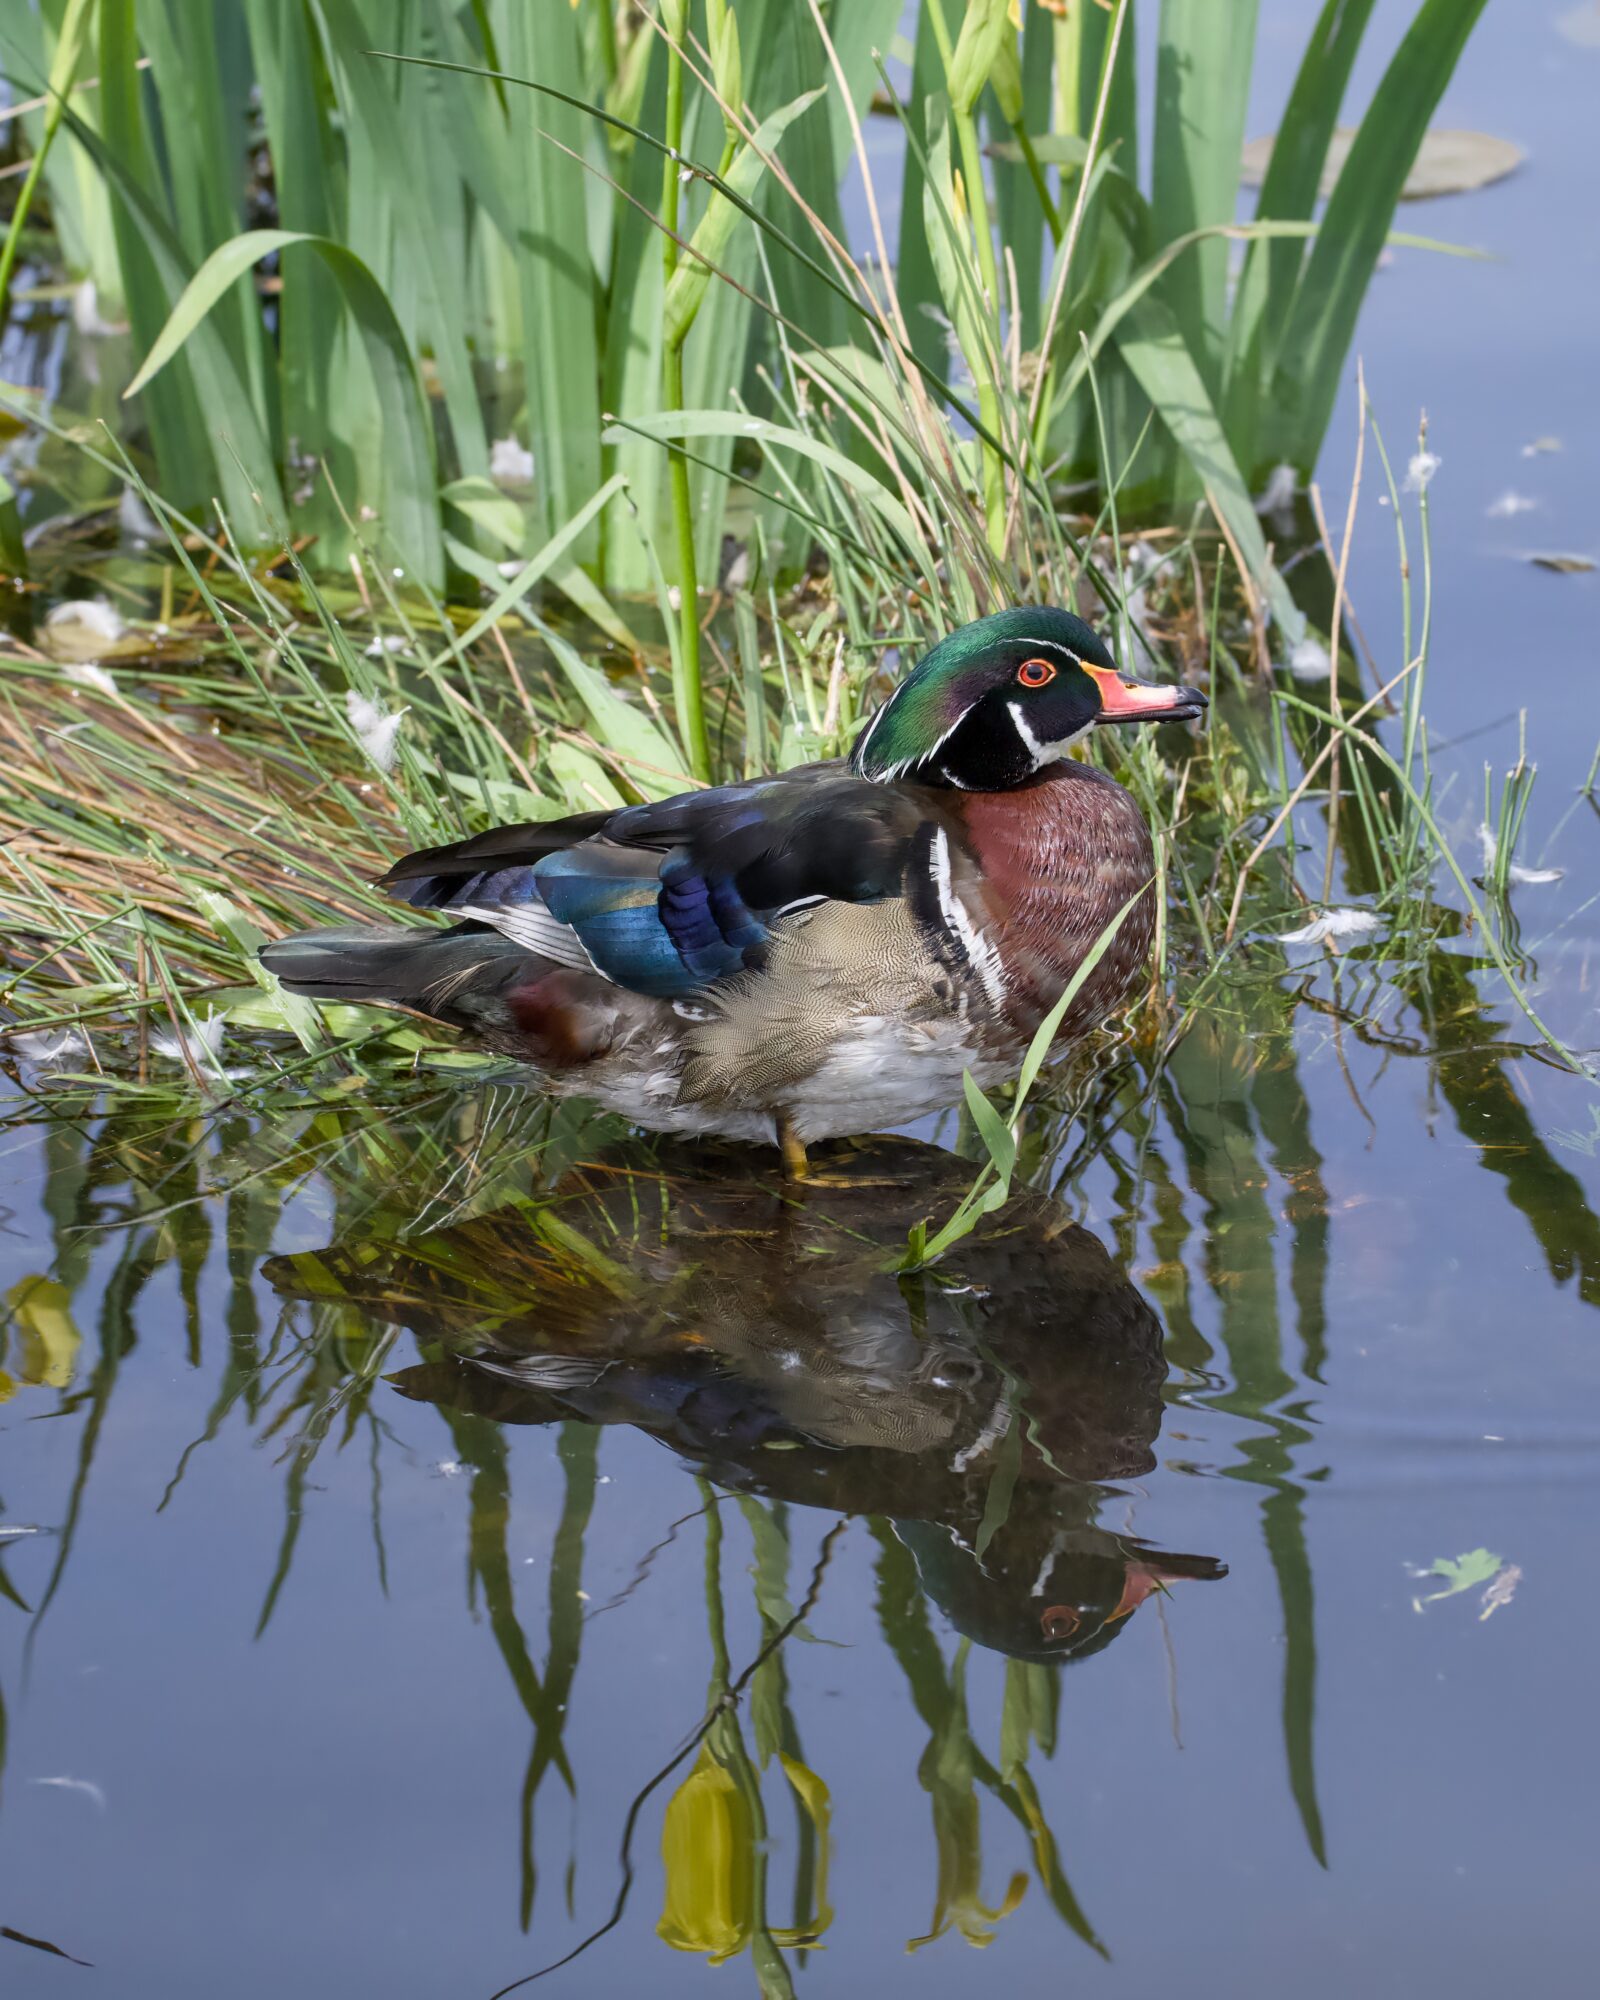 A male Wood Duck is resting with its feet in shallow water, next to a clump of reeds. The water is calm and we can clearly see its reflection